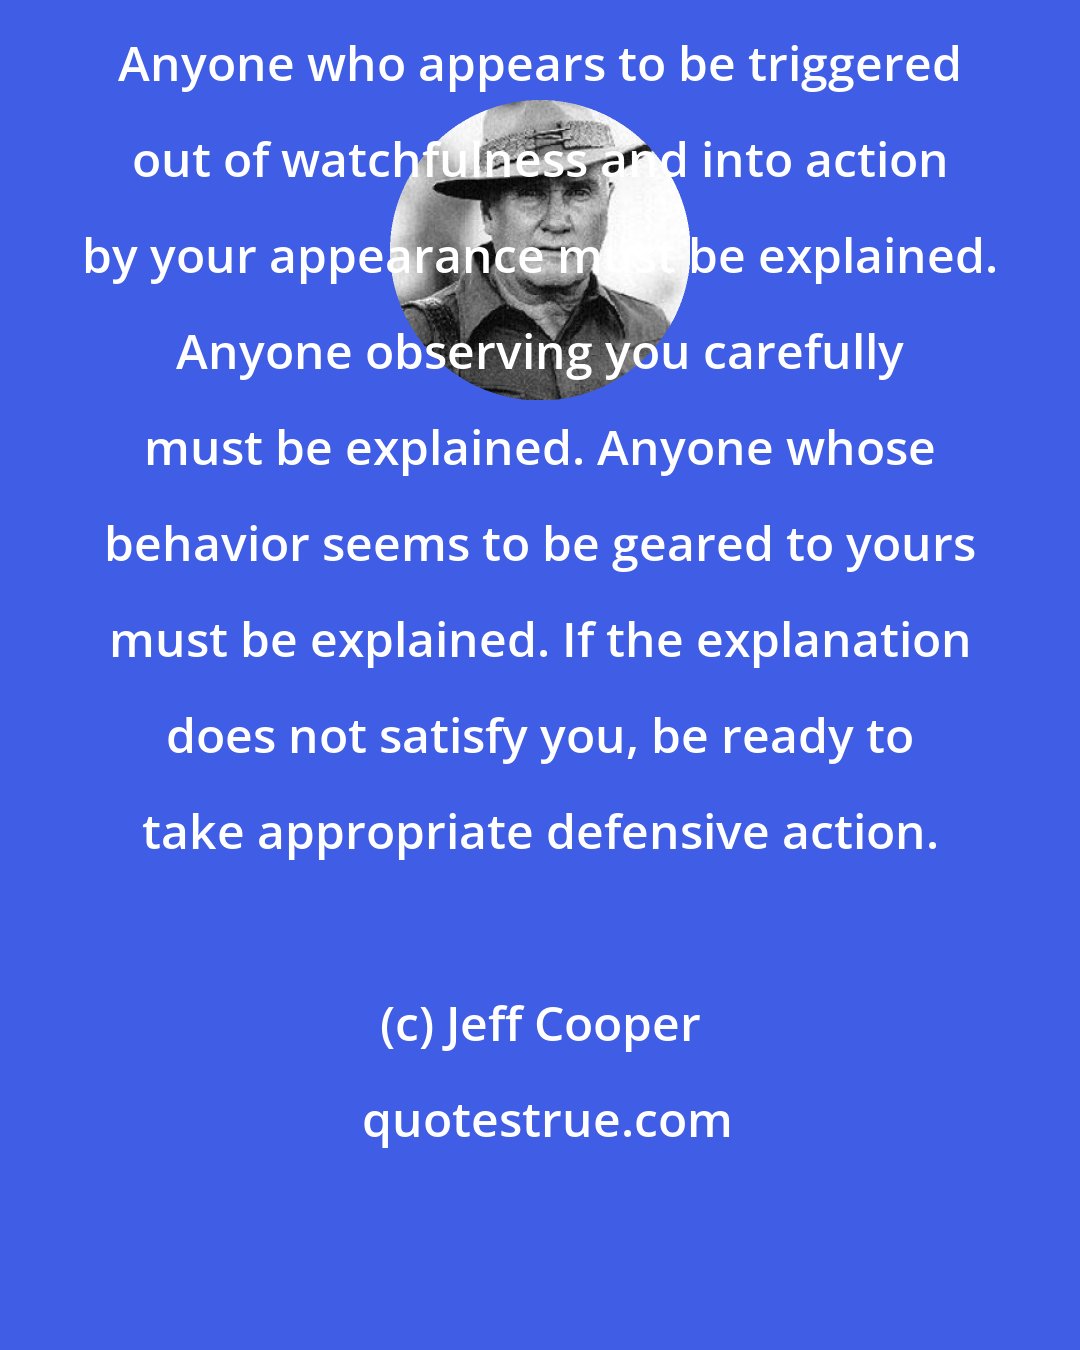 Jeff Cooper: Anyone who appears to be triggered out of watchfulness and into action by your appearance must be explained. Anyone observing you carefully must be explained. Anyone whose behavior seems to be geared to yours must be explained. If the explanation does not satisfy you, be ready to take appropriate defensive action.